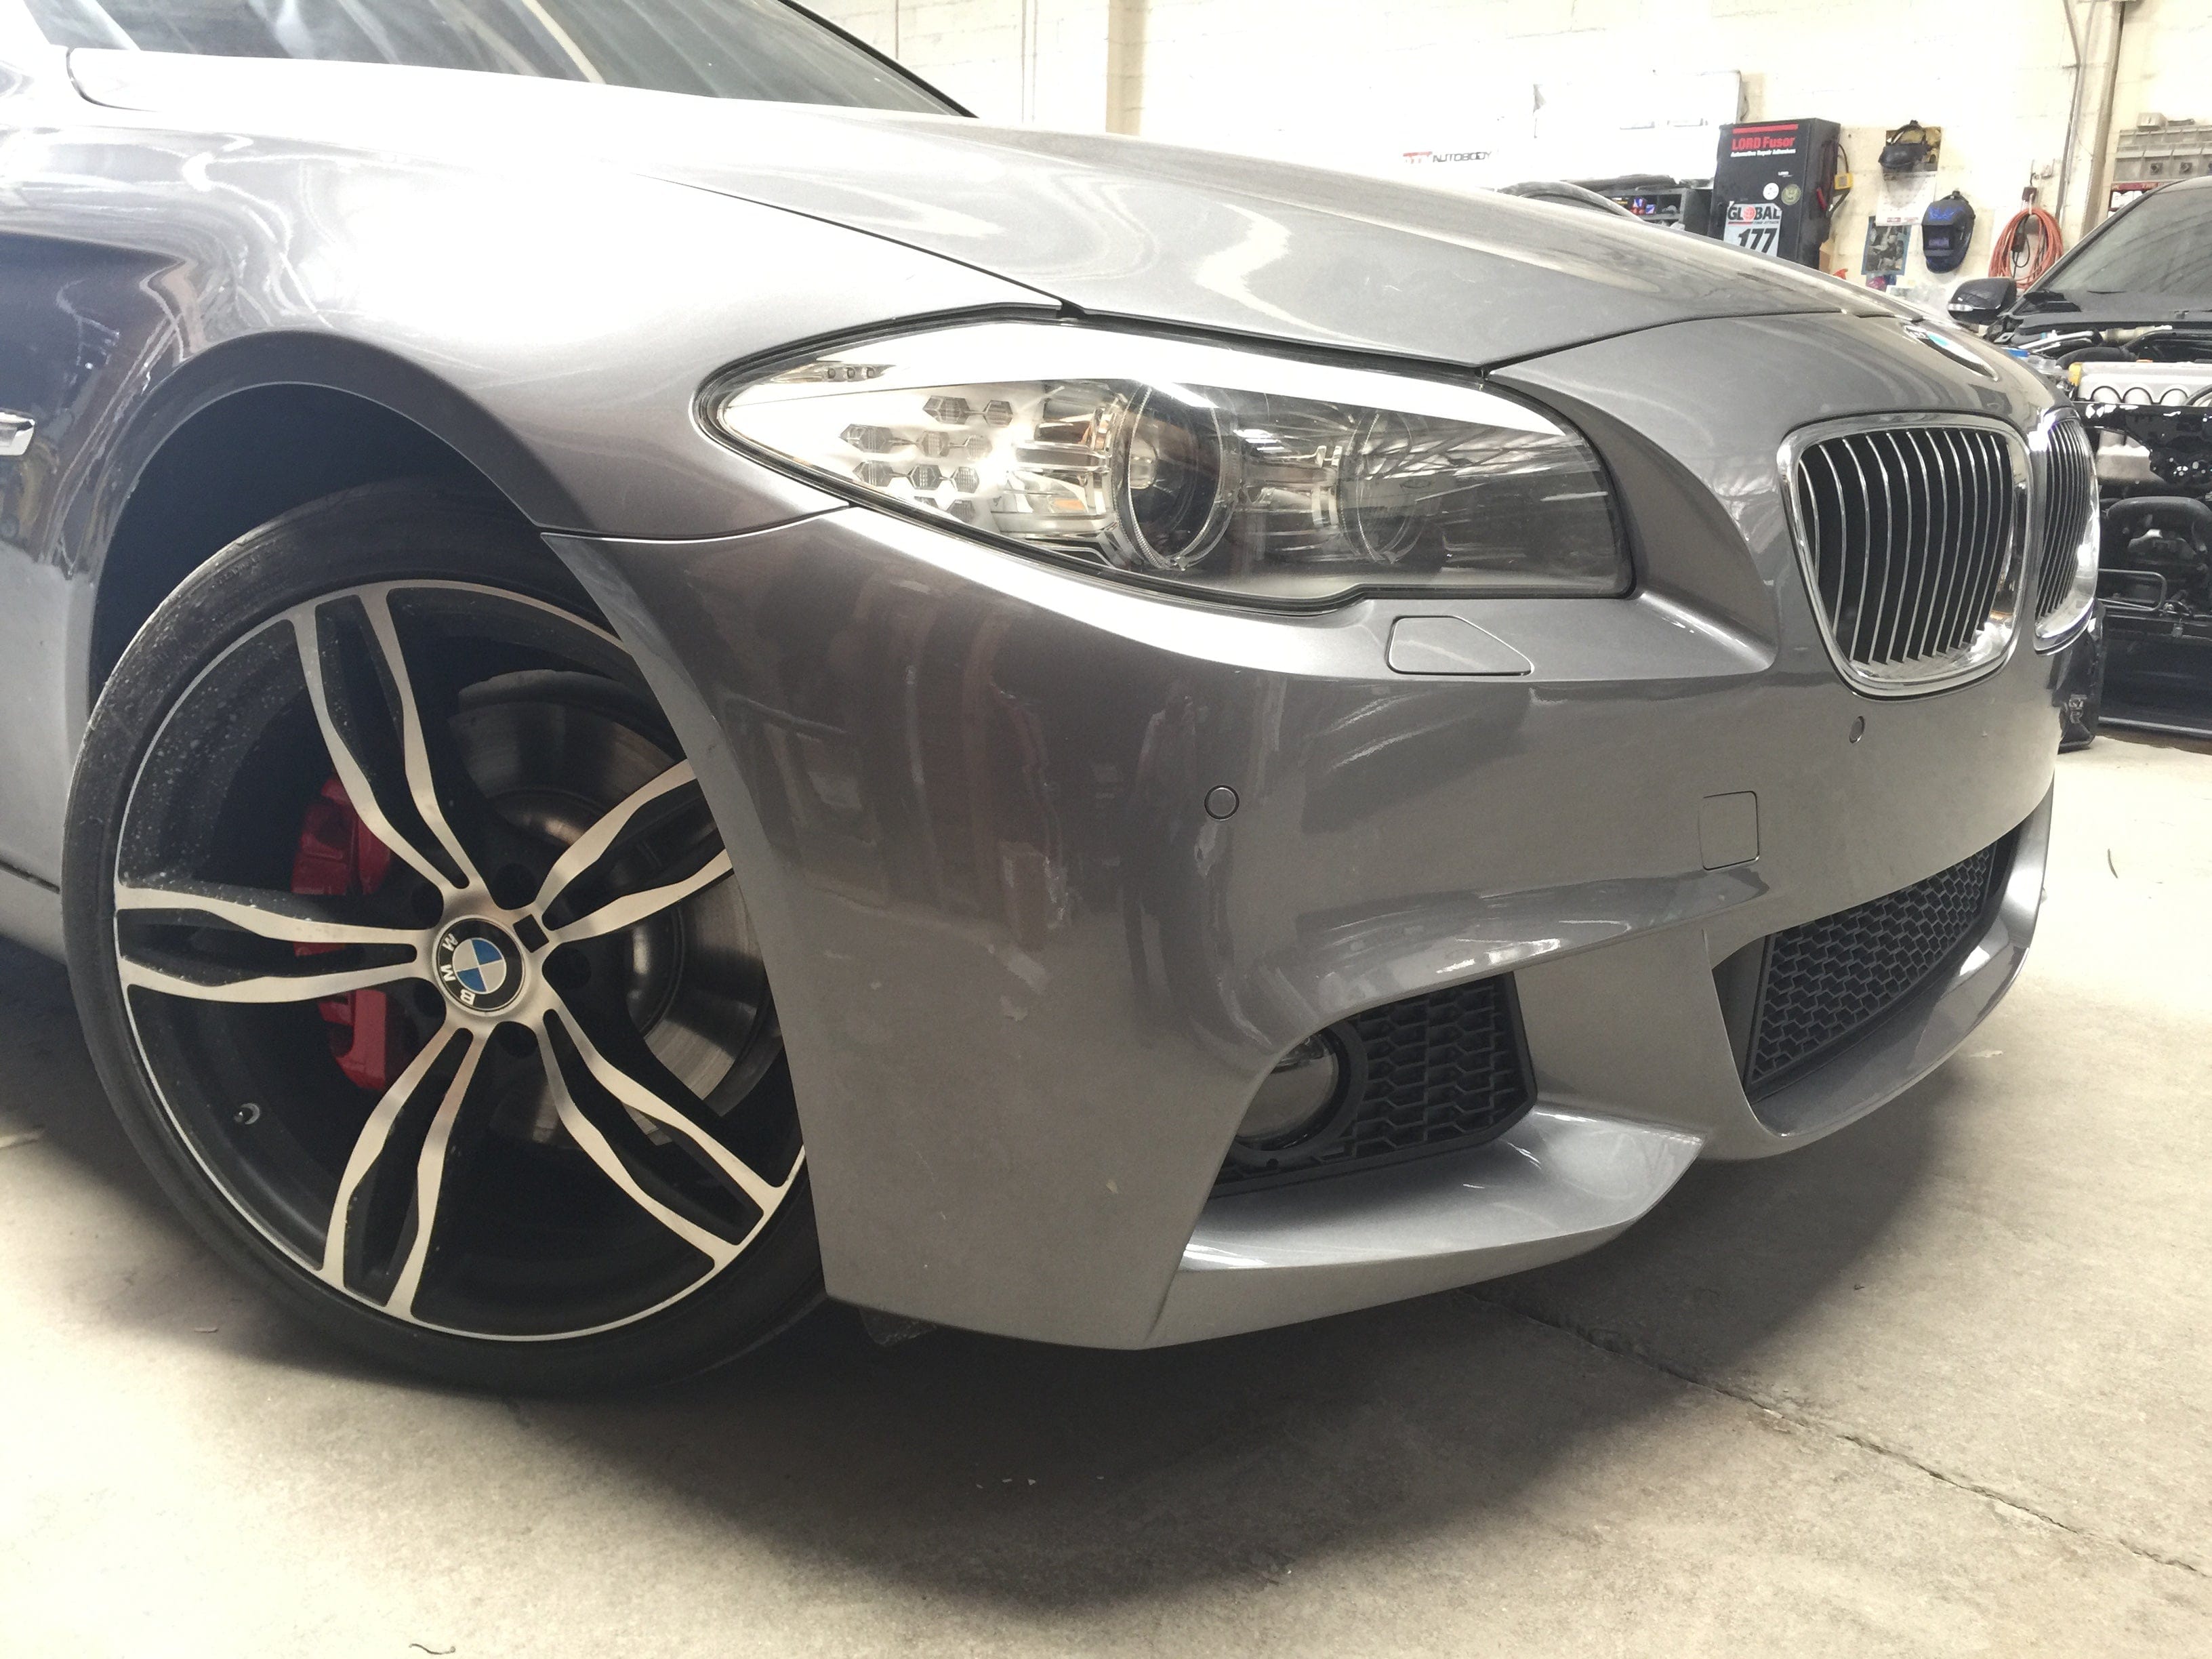 Upgrading the BMW F10 5 Series - All you need to know